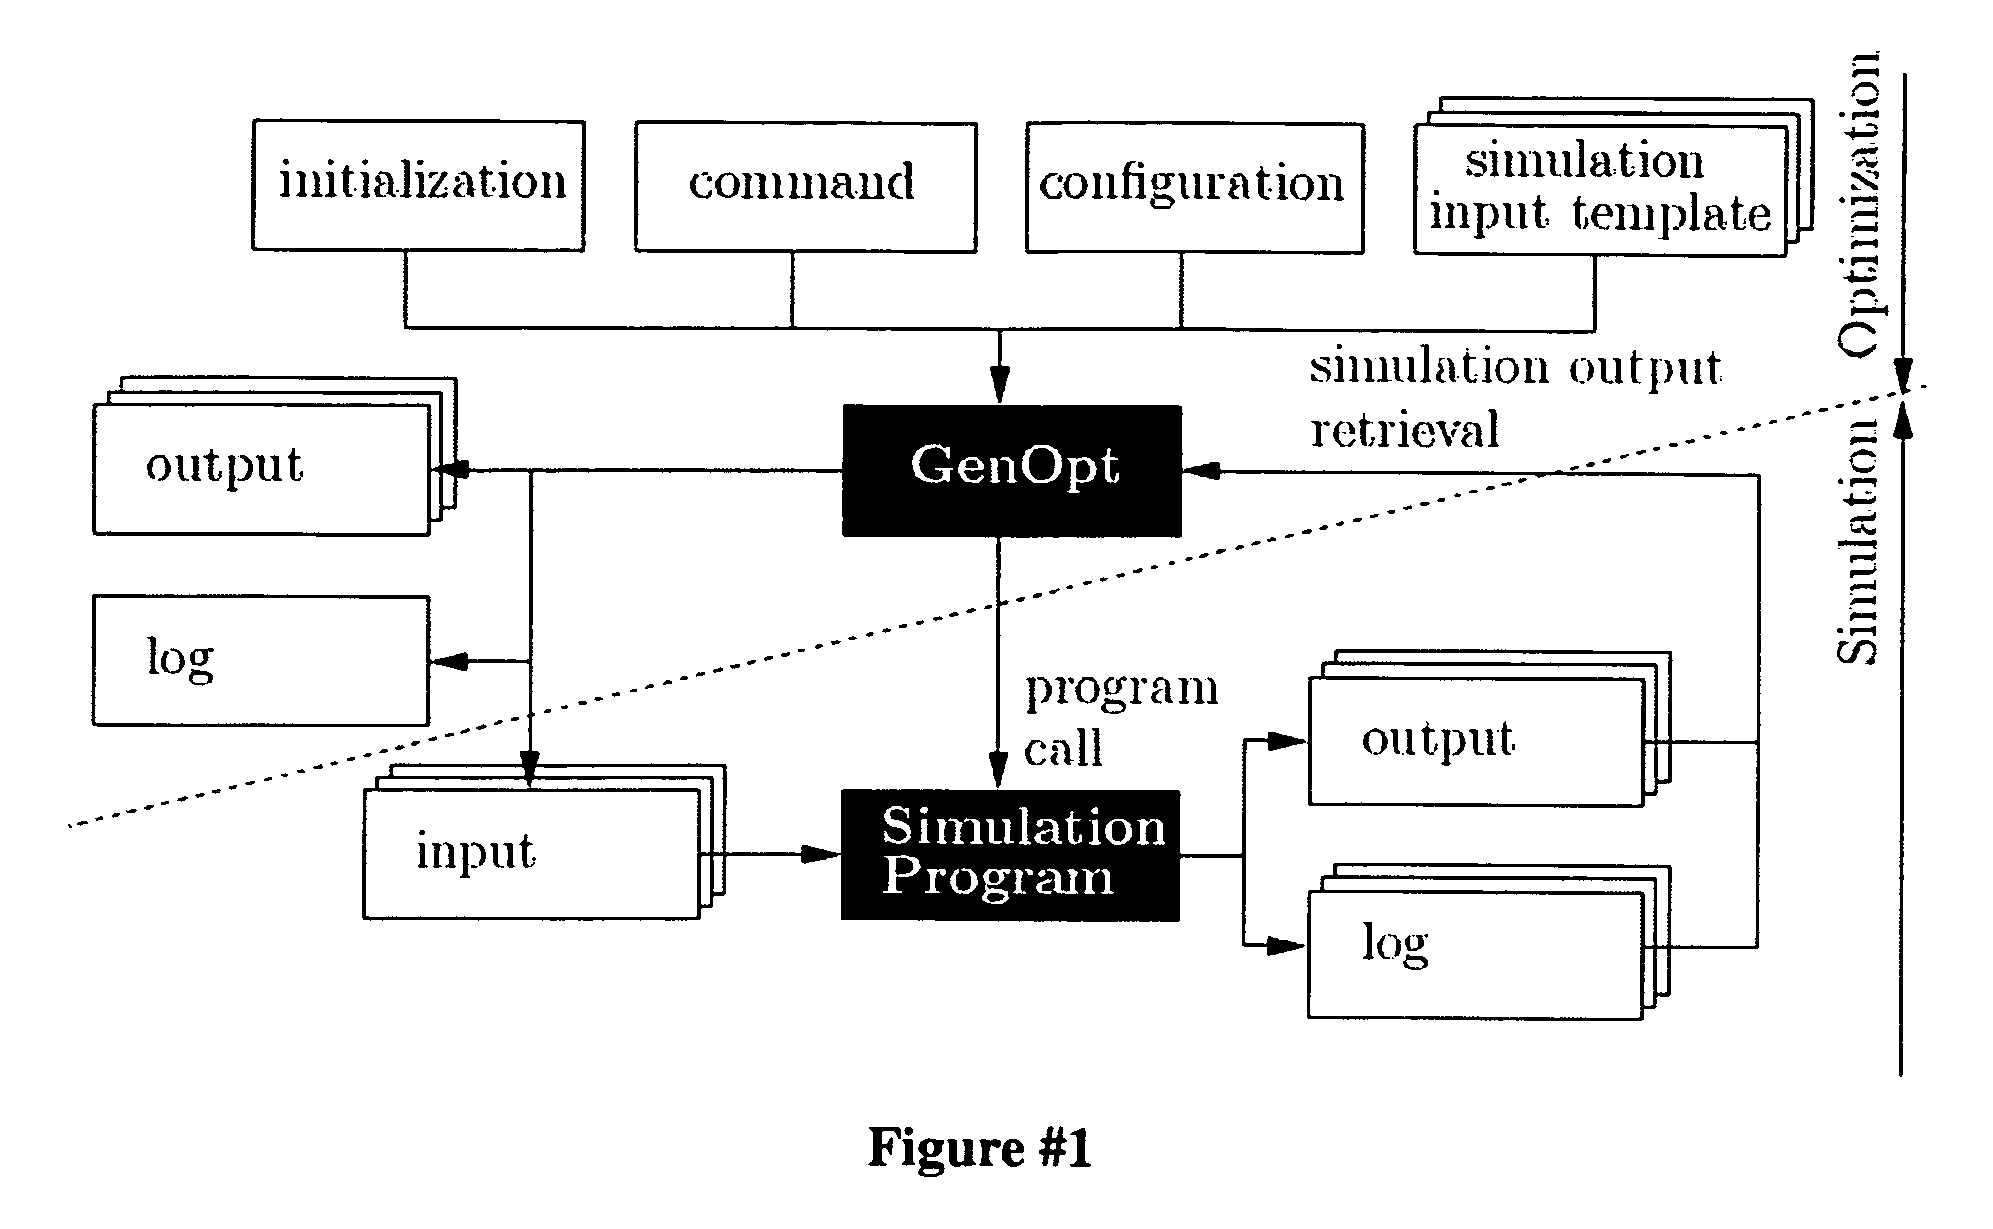 Real-time global optimization of building setpoints and sequence of operation